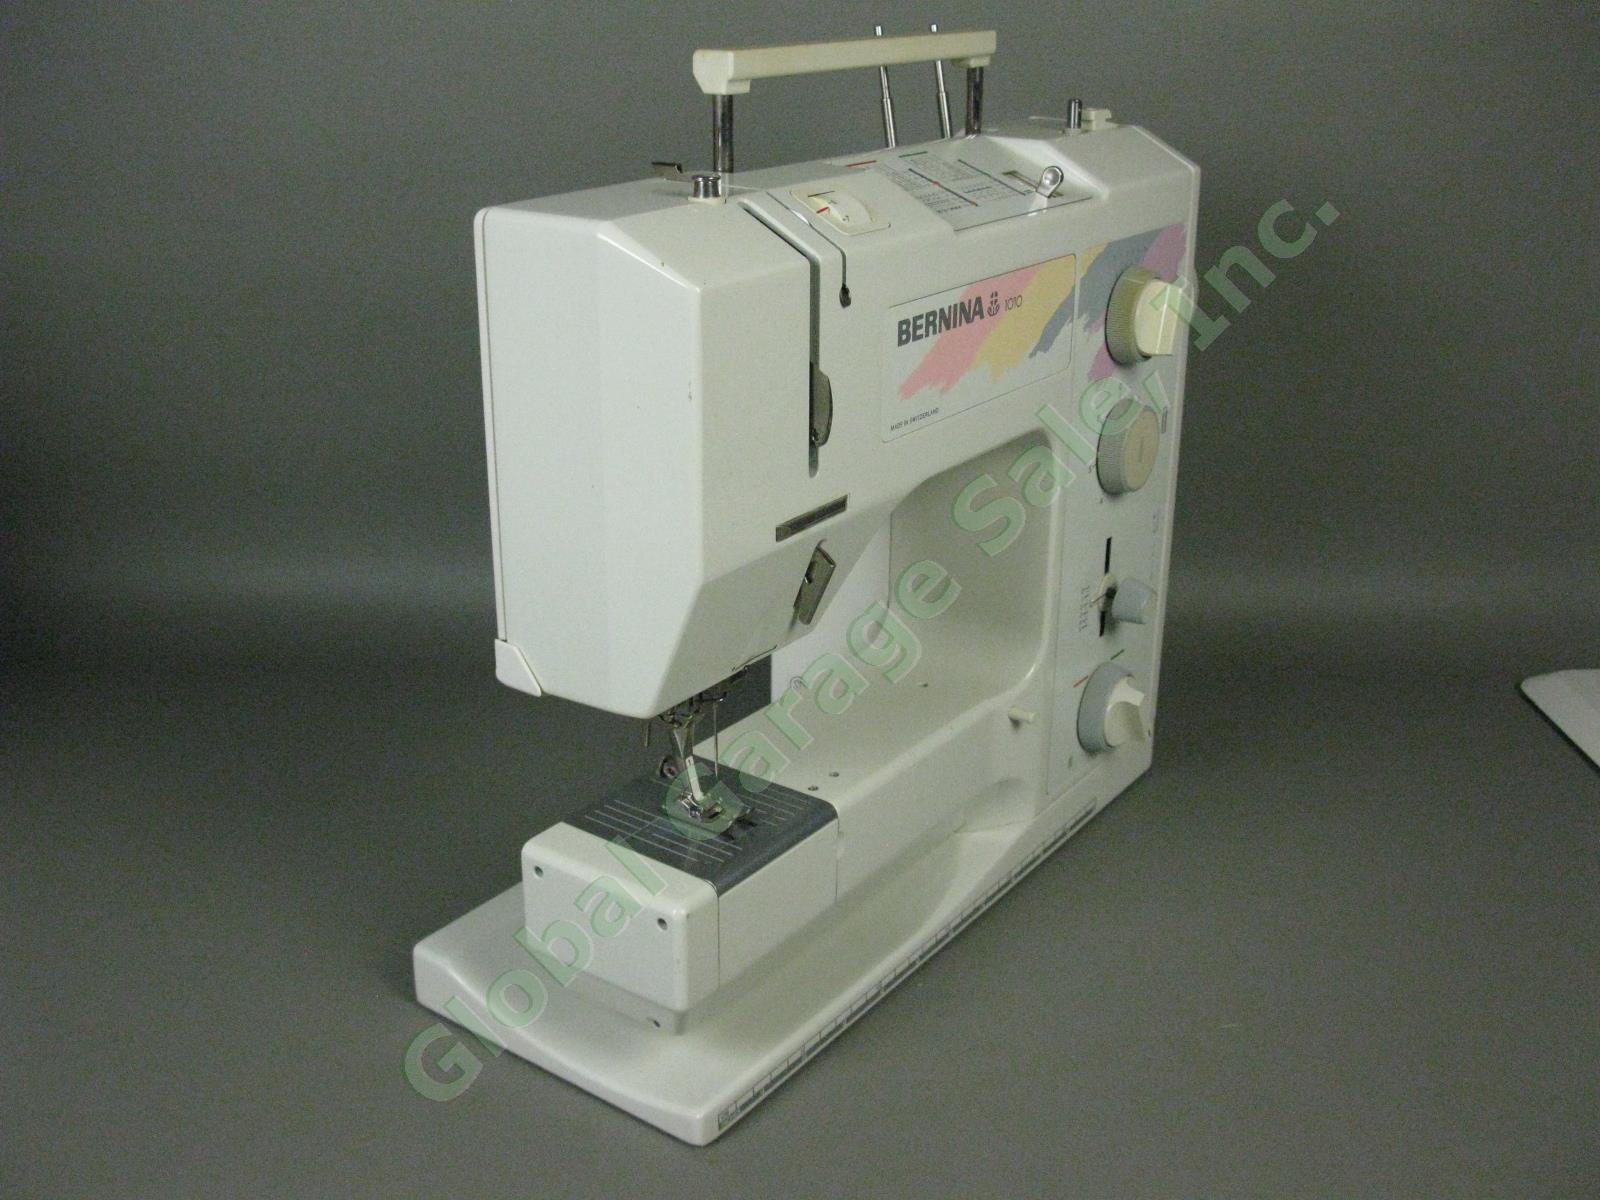 Bernina 1010 Sewing Machine w/Slide-On Extension Table Pedal Feet Manual Cover + 2